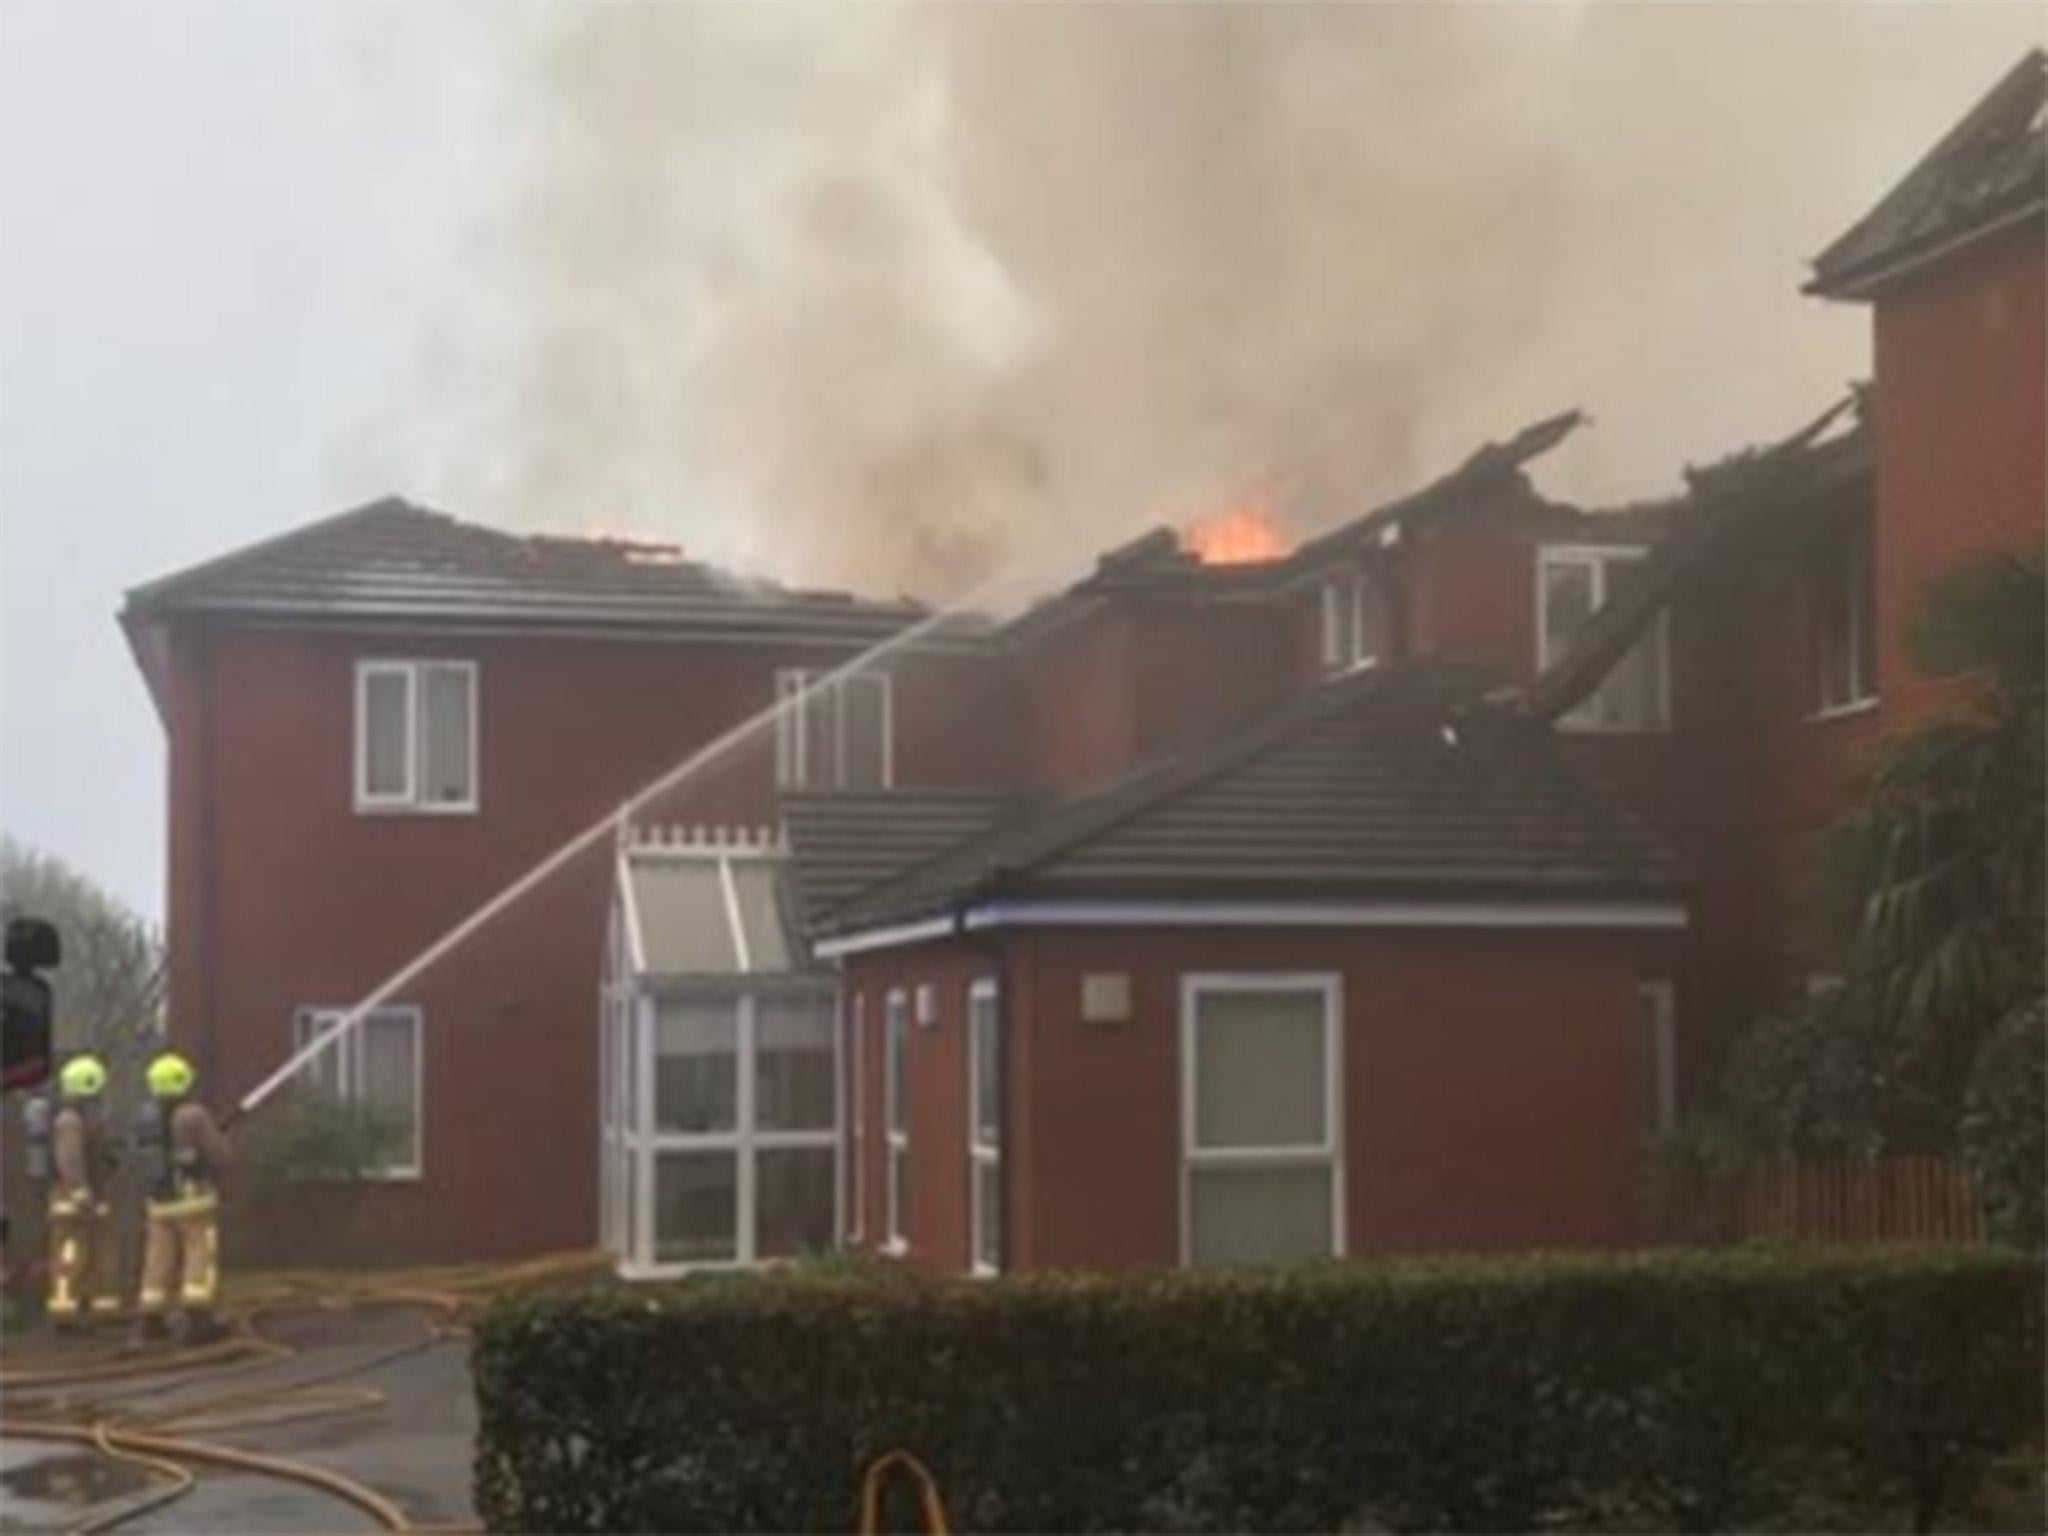 Crews made at least 33 rescues at the Newgrange care home